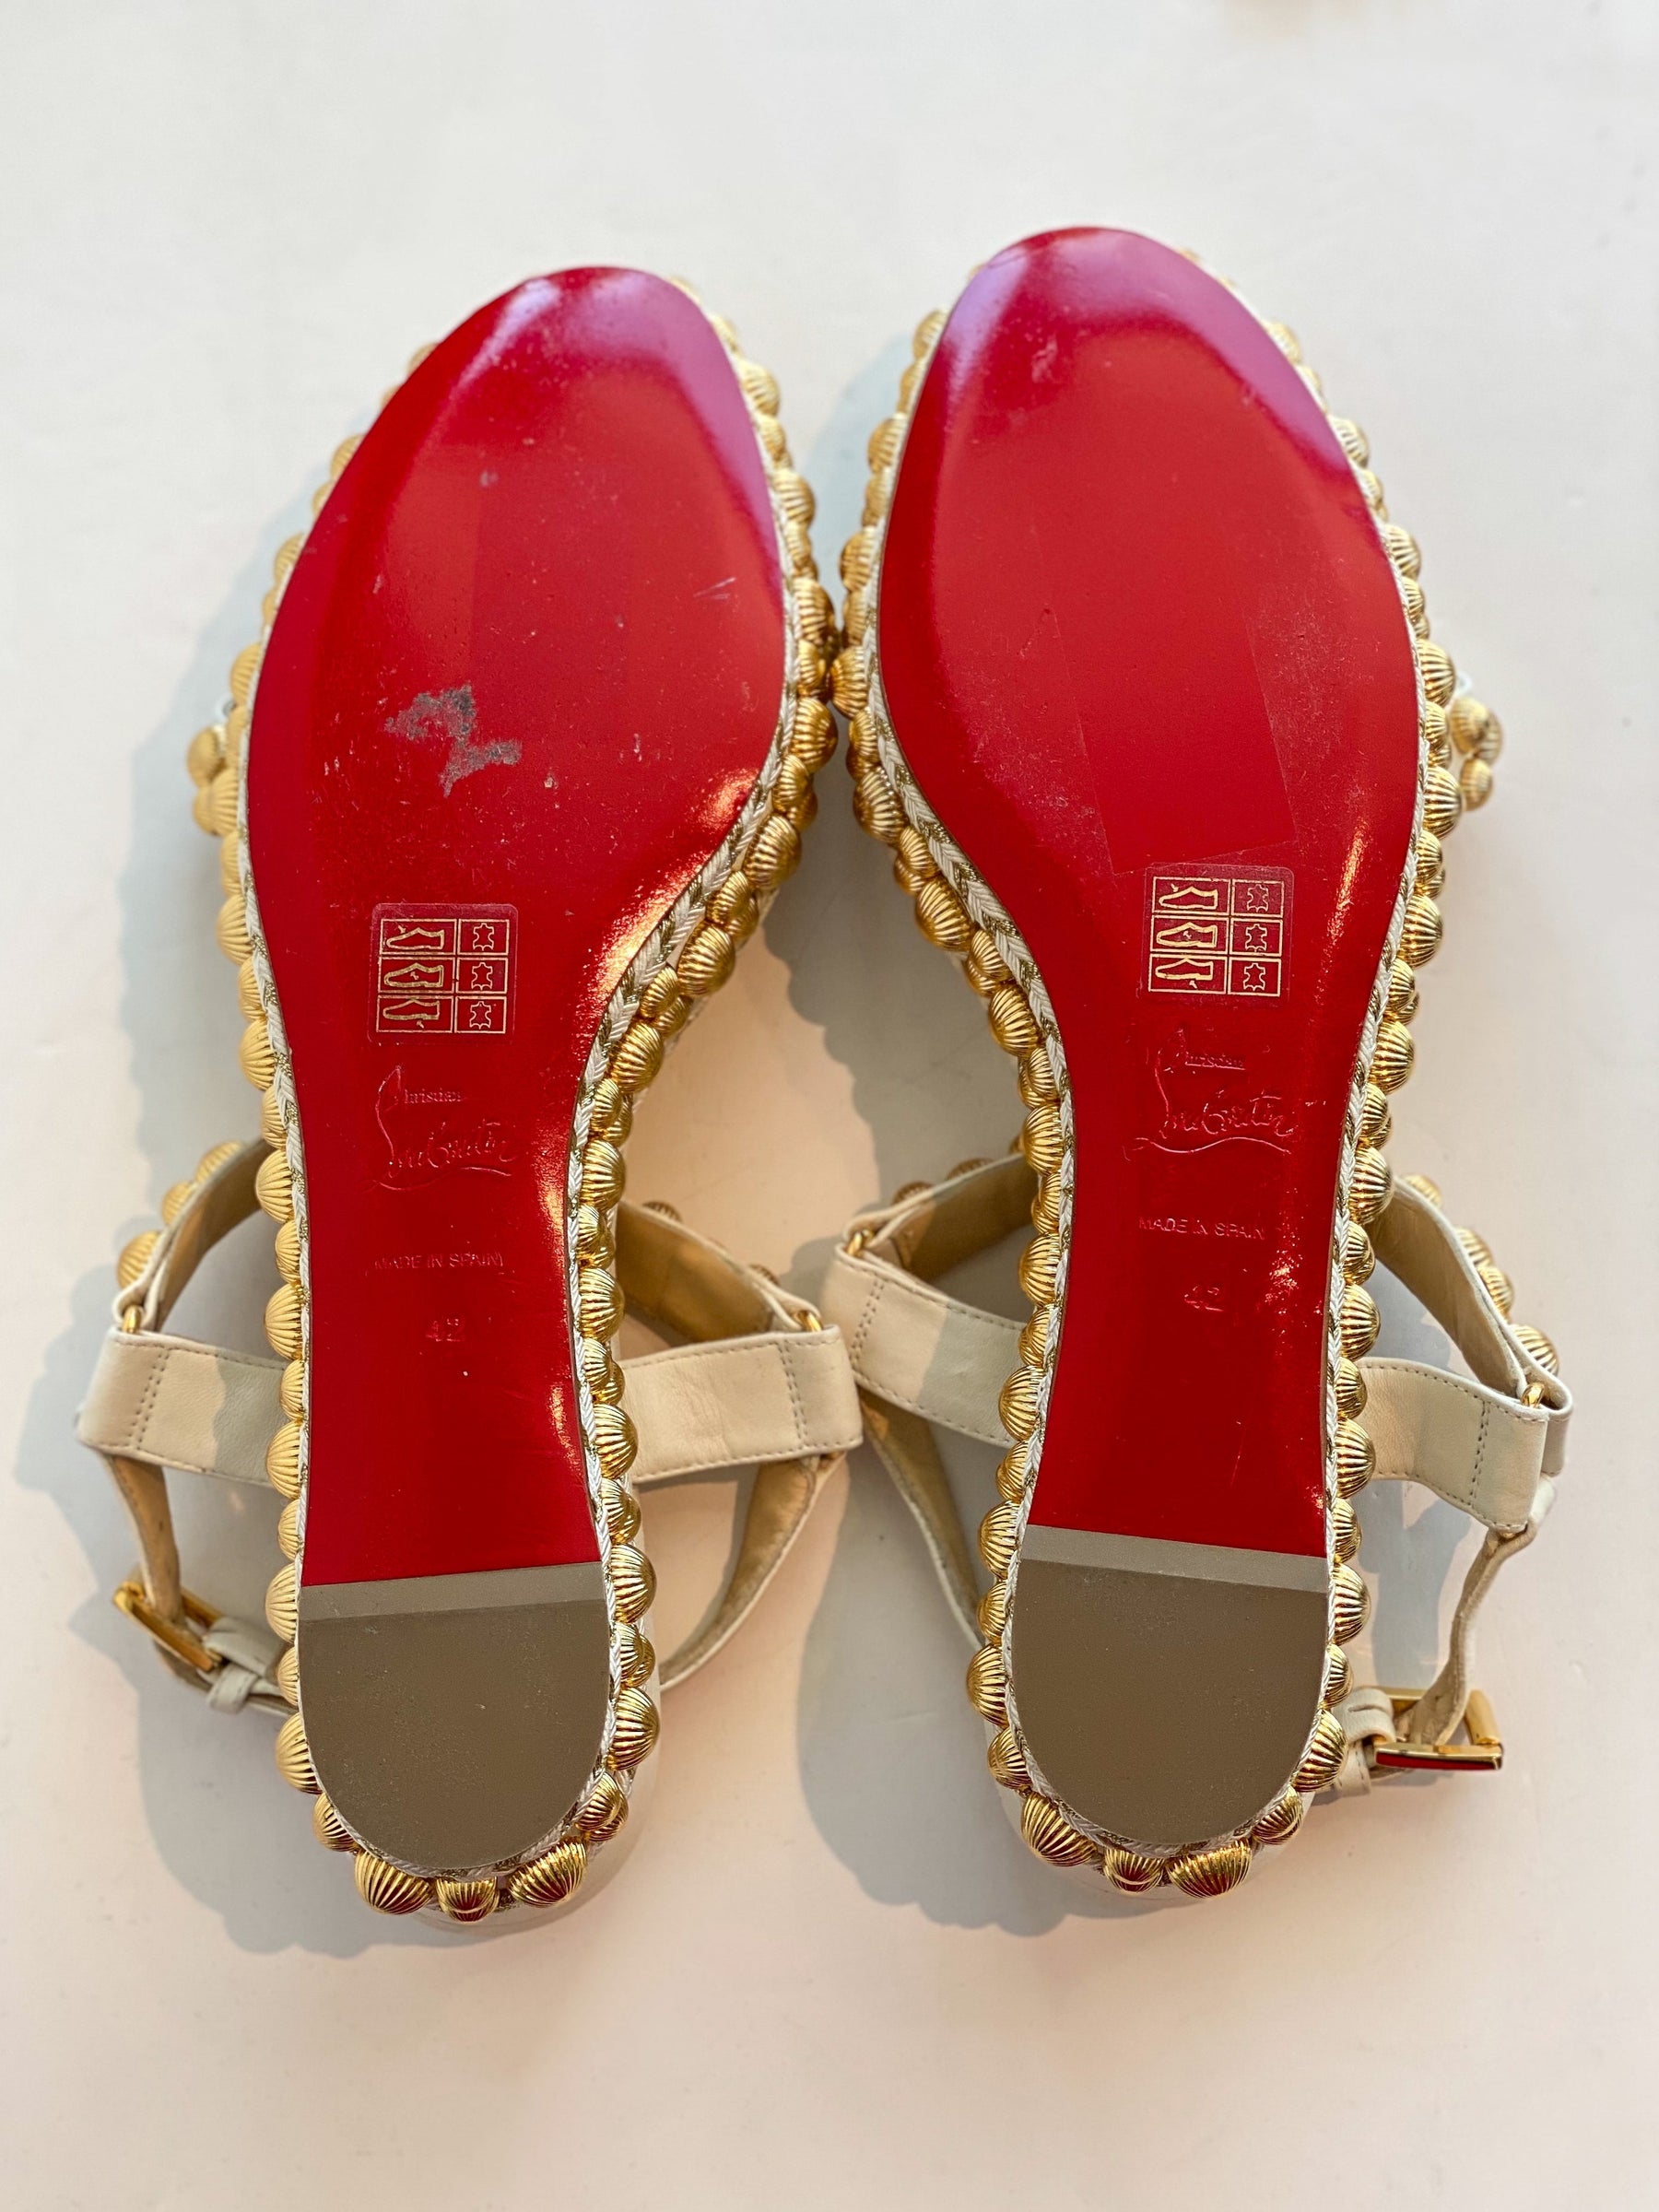 Christian Louboutin Studded Wedge Sandals White and Gold Bottom of Shoes